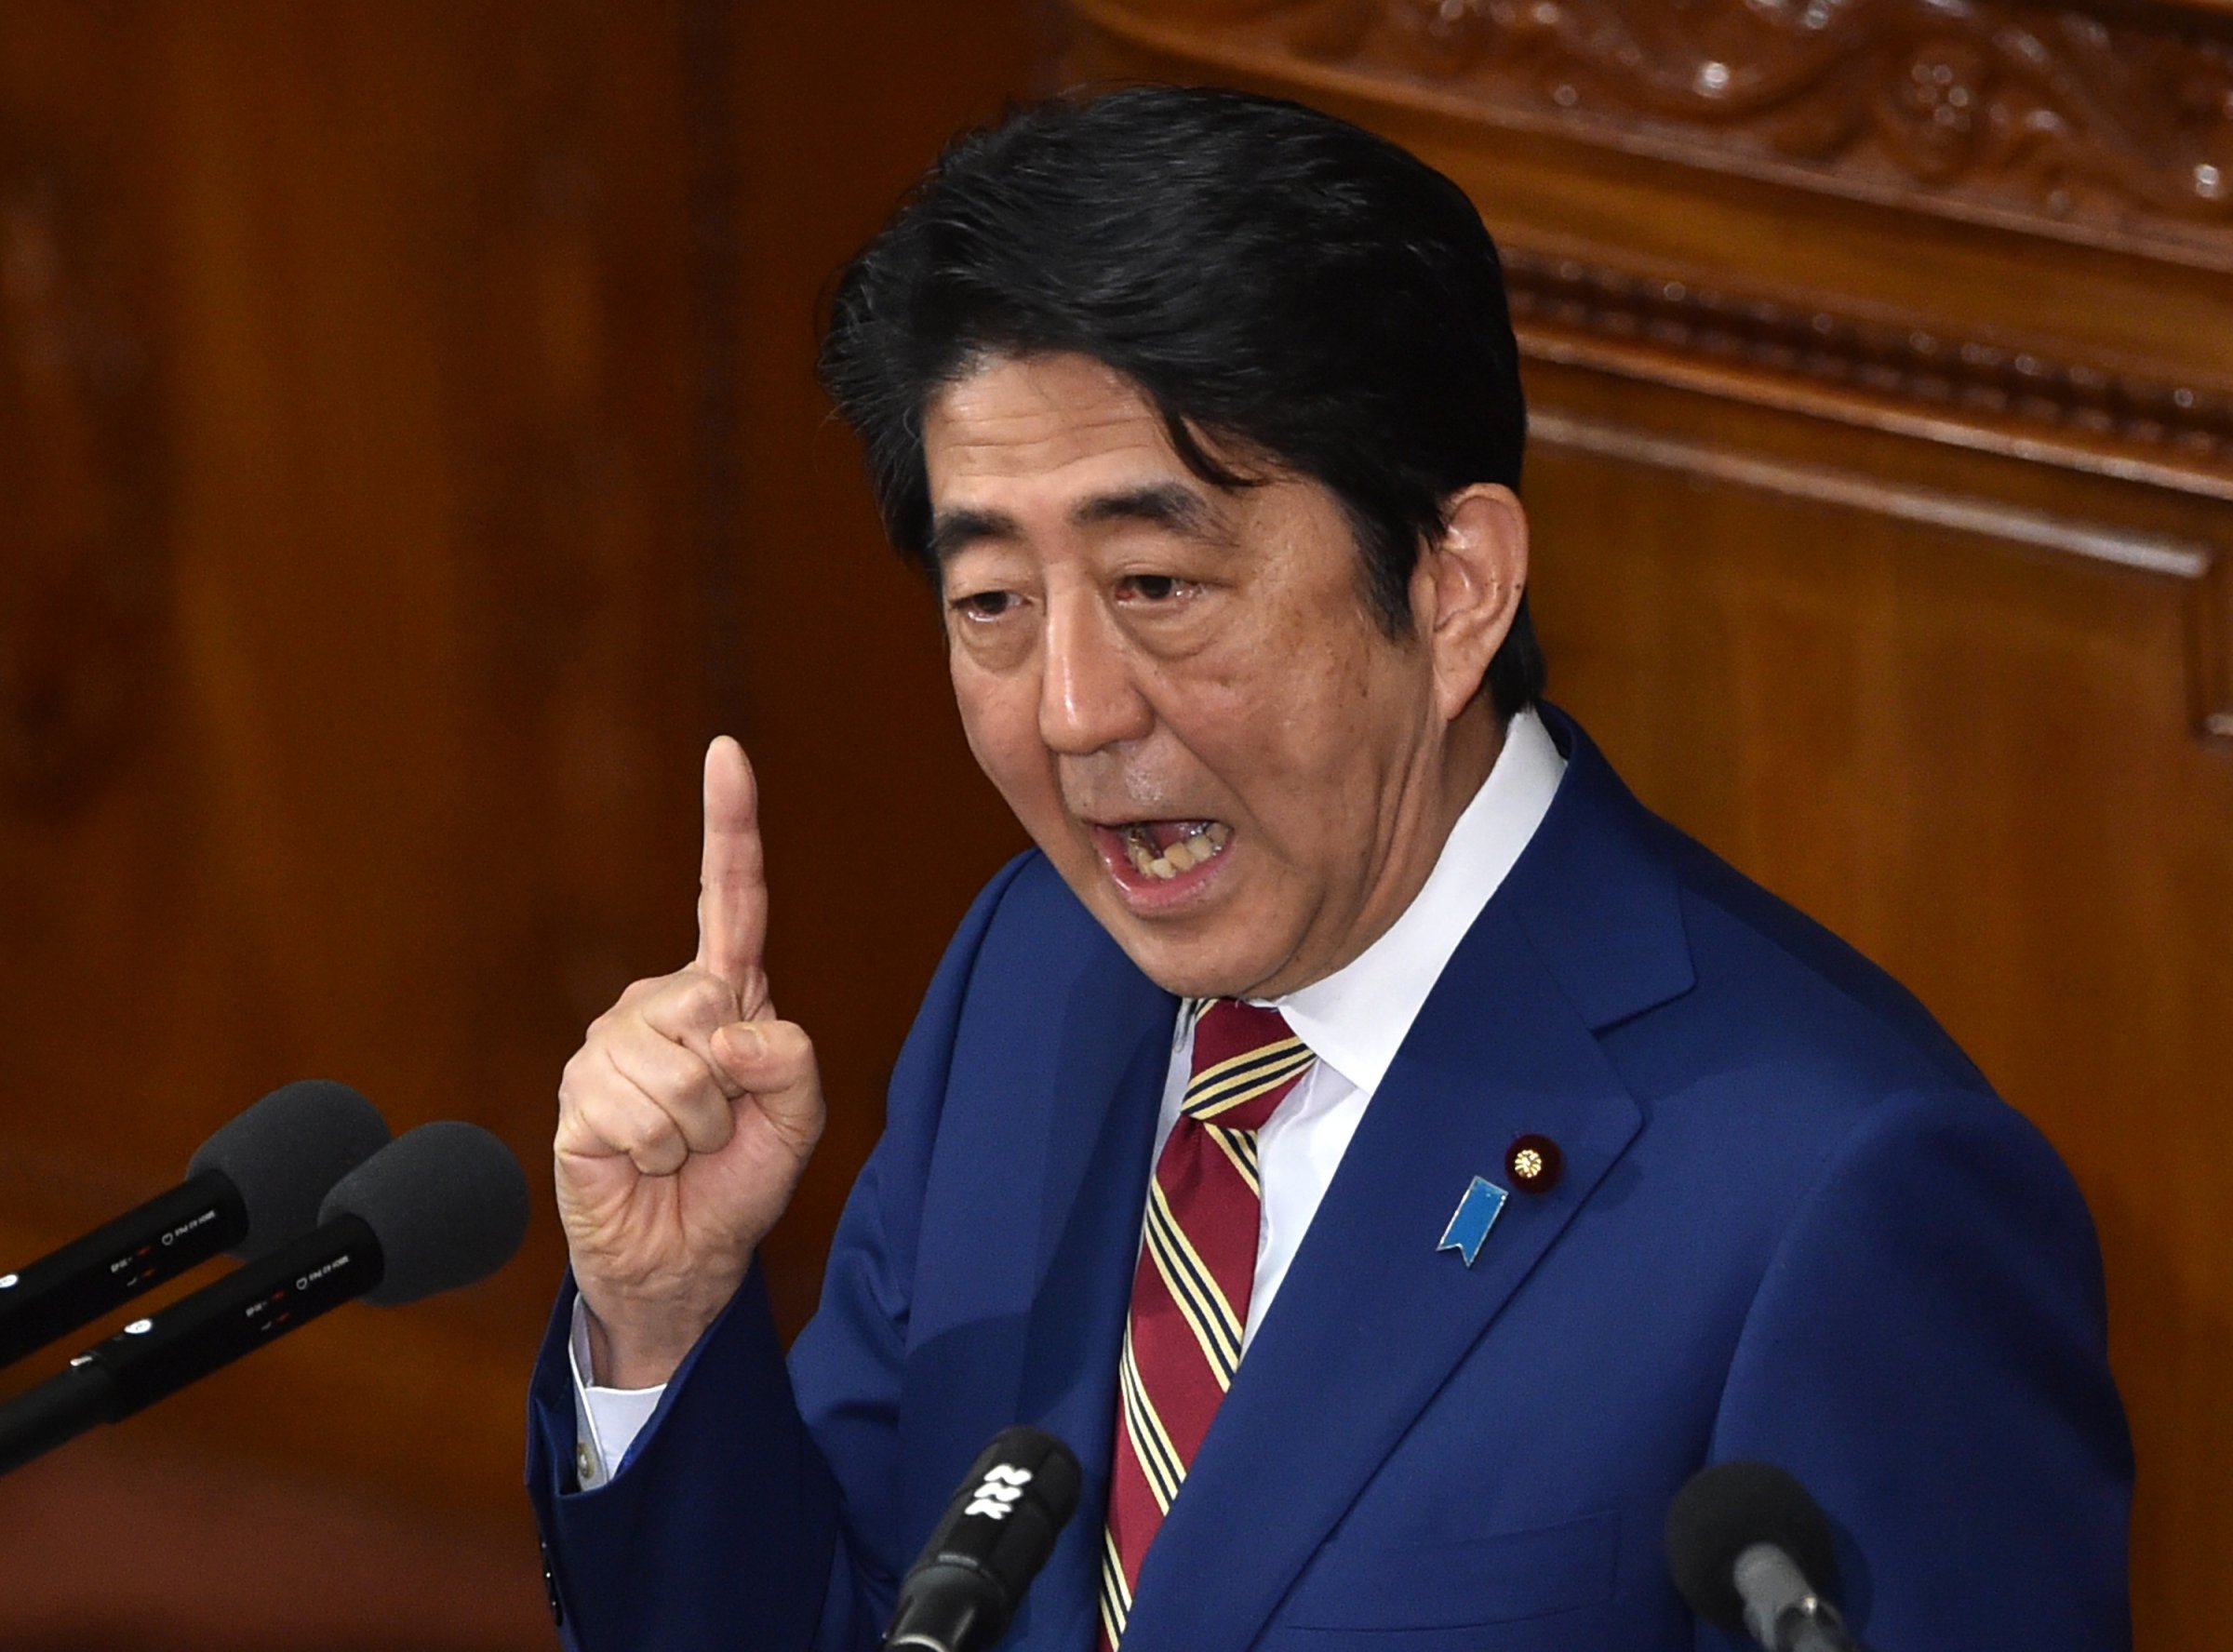 Japanese Prime Minister Shinzo Abe delivers his policy speech during a plenary session of the House of Representatives in Tokyo on Jan. 22, 2016.